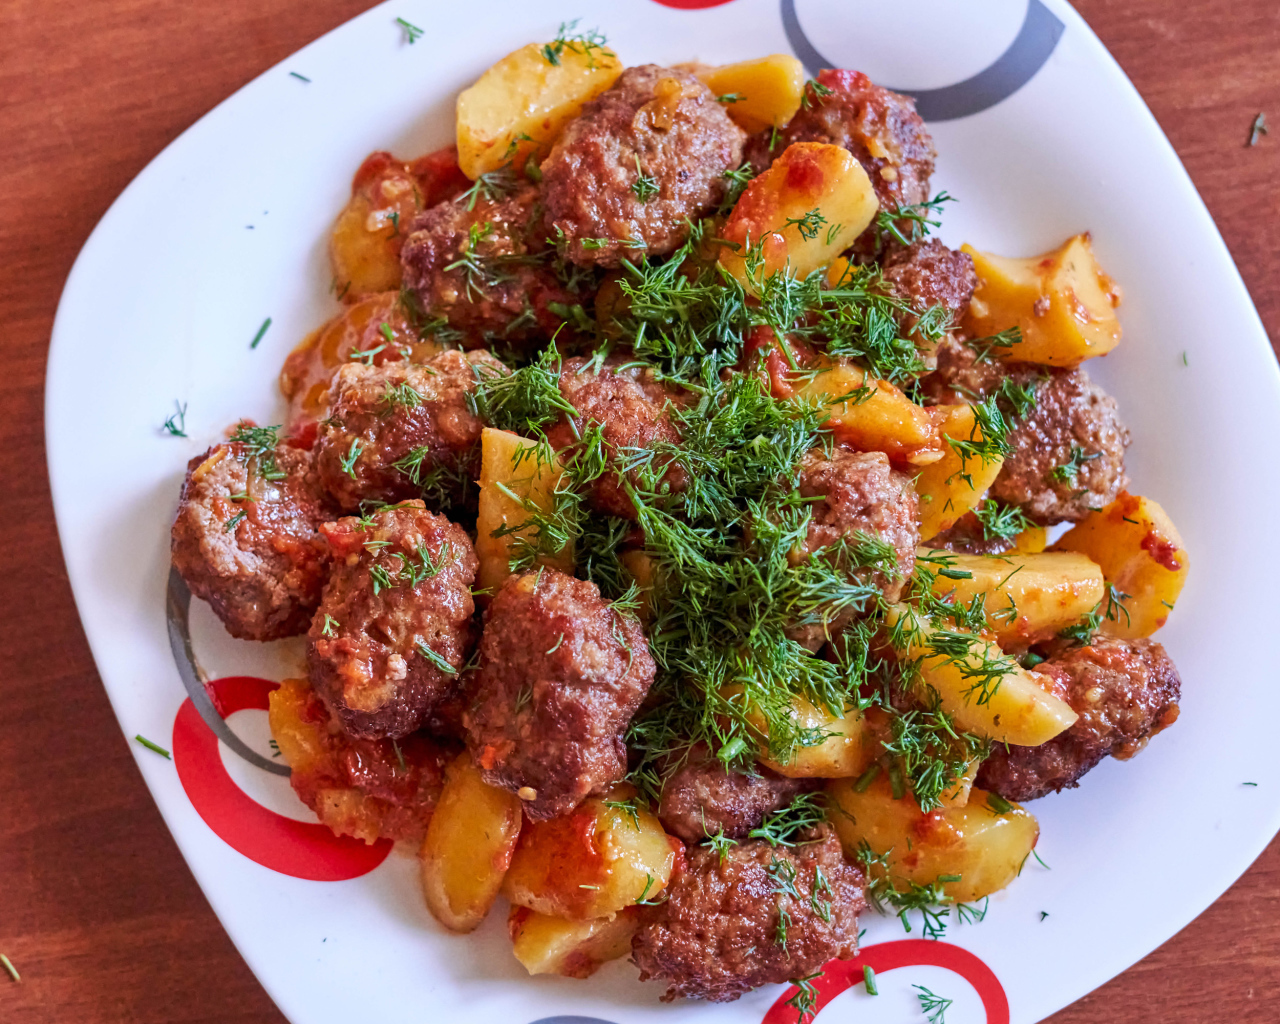 Meatballs with potatoes and dill on a white plate